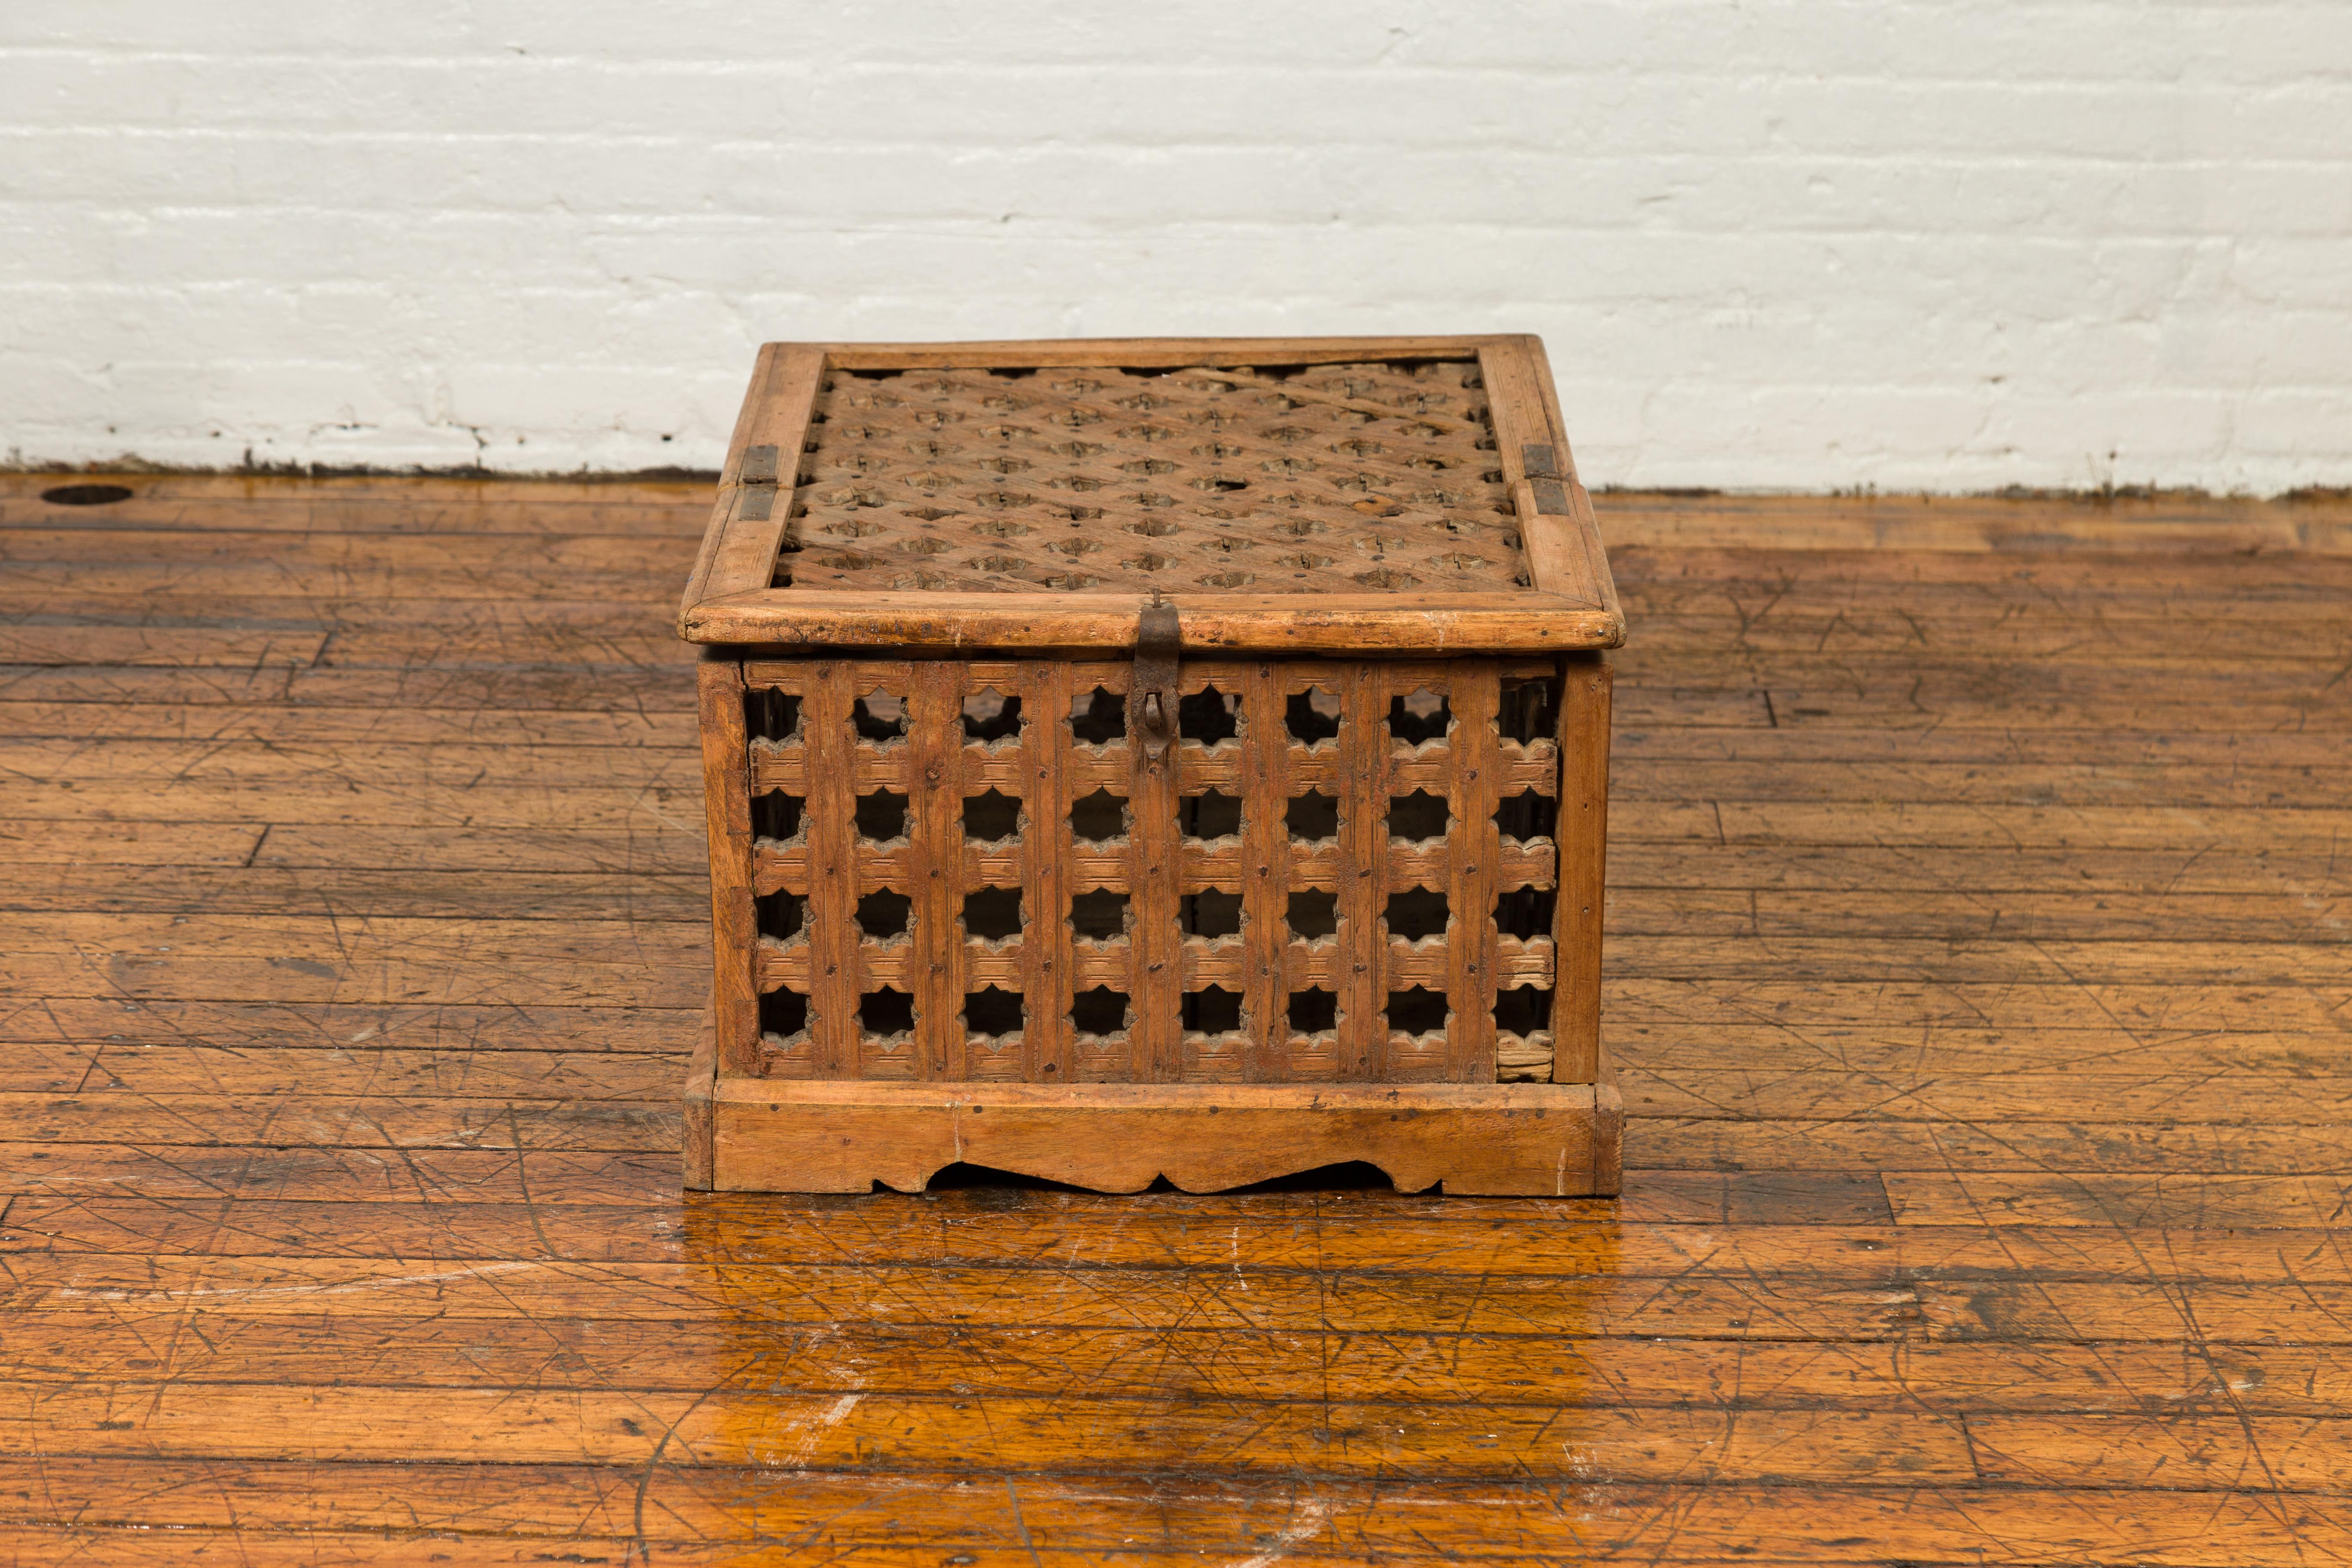 An Indian antique open food box with pierced star motifs and bracketed plinth. Crafted in India, this antique food box boasts a nicely weathered appearance. Its linear silhouette is rhythmically accented with pierced star motifs while the first half